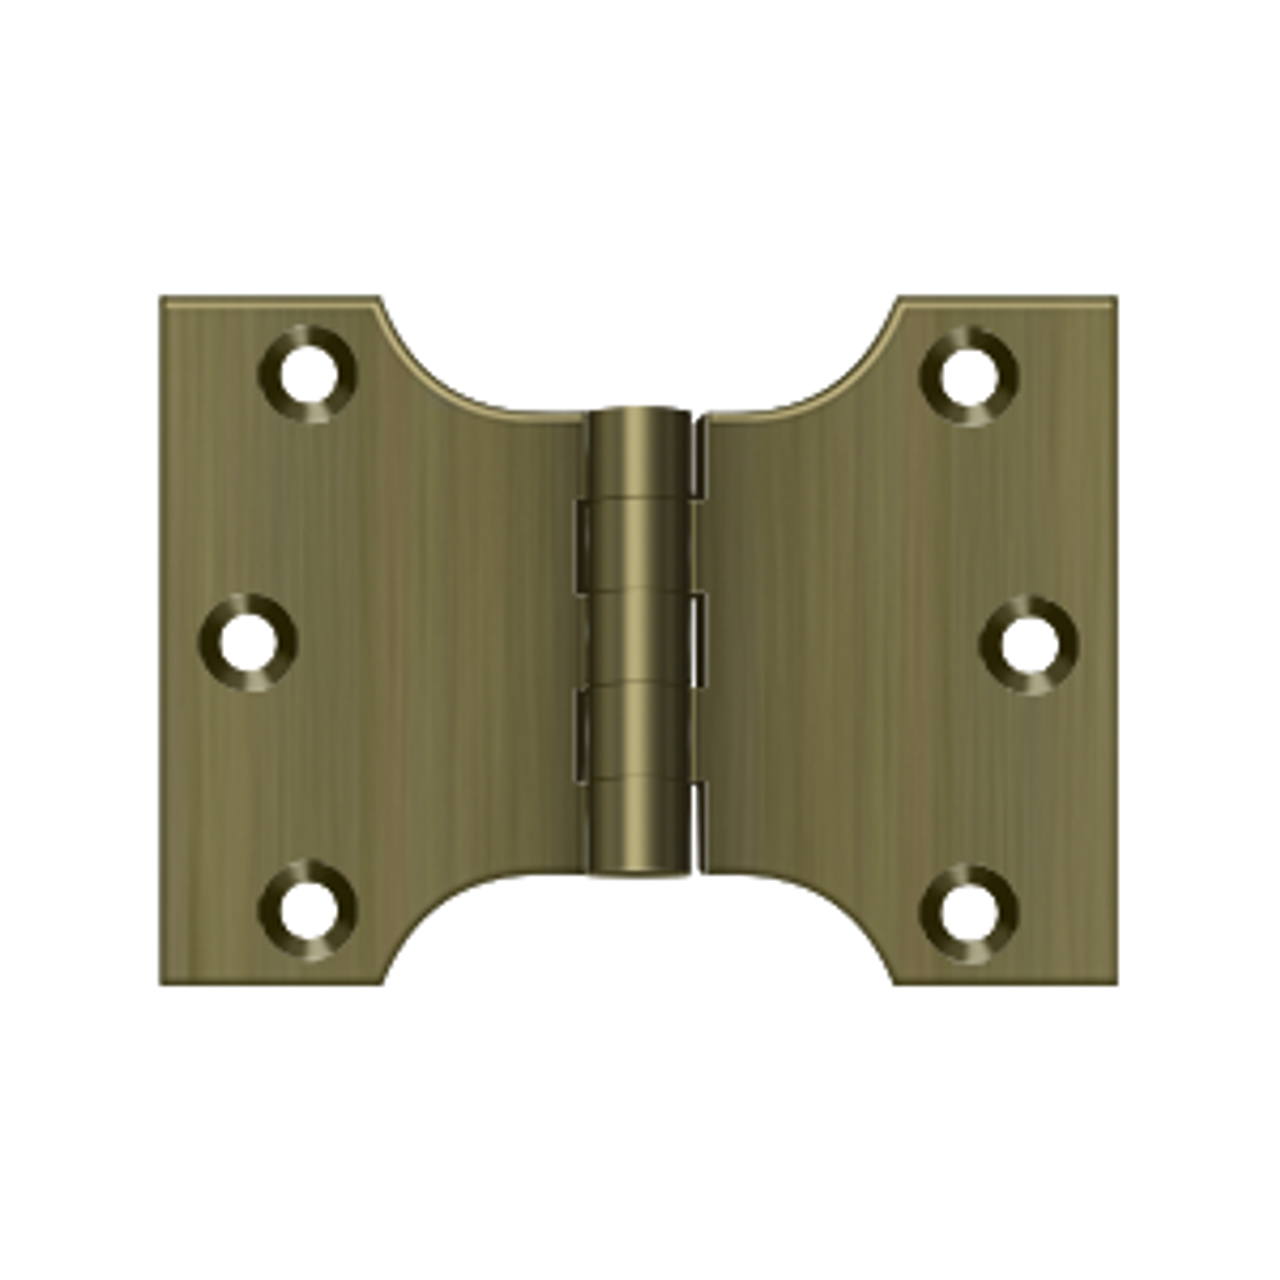 Deltana DSPA3040 3" X 4" PARLIAMENT HINGE SOLID BRASS